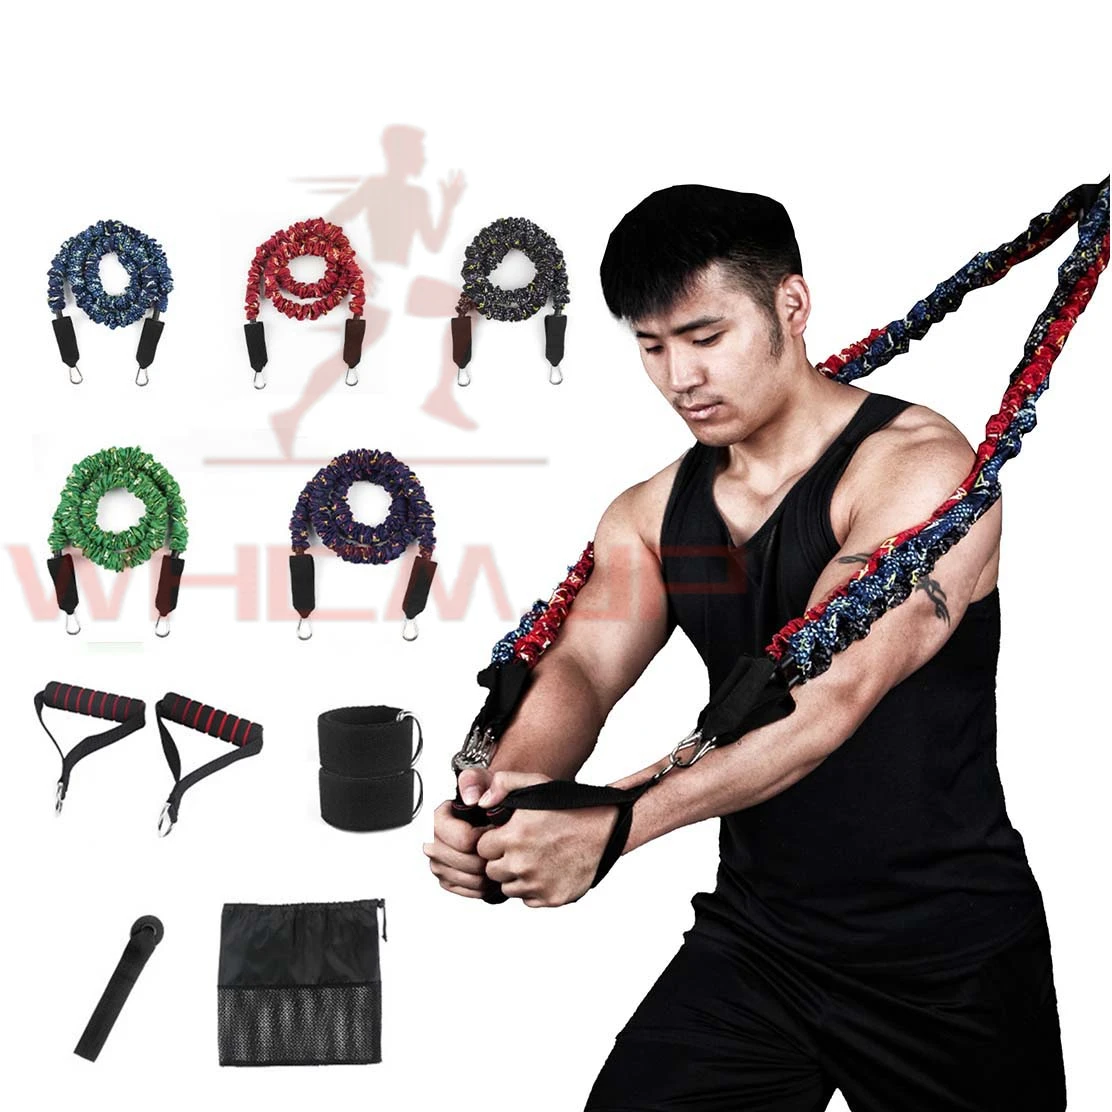 

2 Belt Resistance Elastic Bands Ankle Tension 2 Different Anchor 5 1 Bag 11pcs Of With Storage Door Set And Handles Straps A